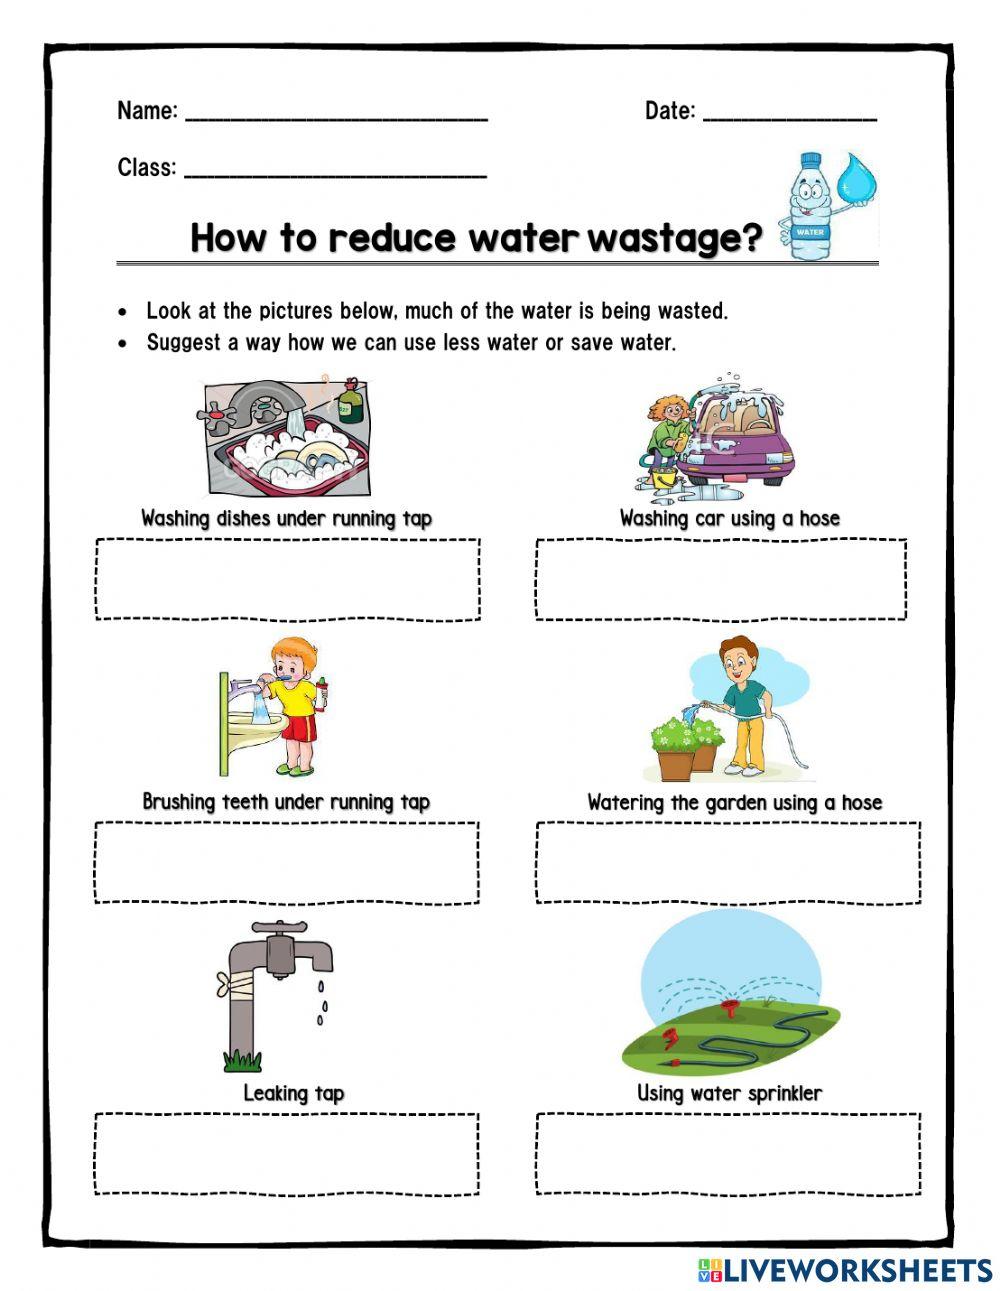 How to reduce water wastage?